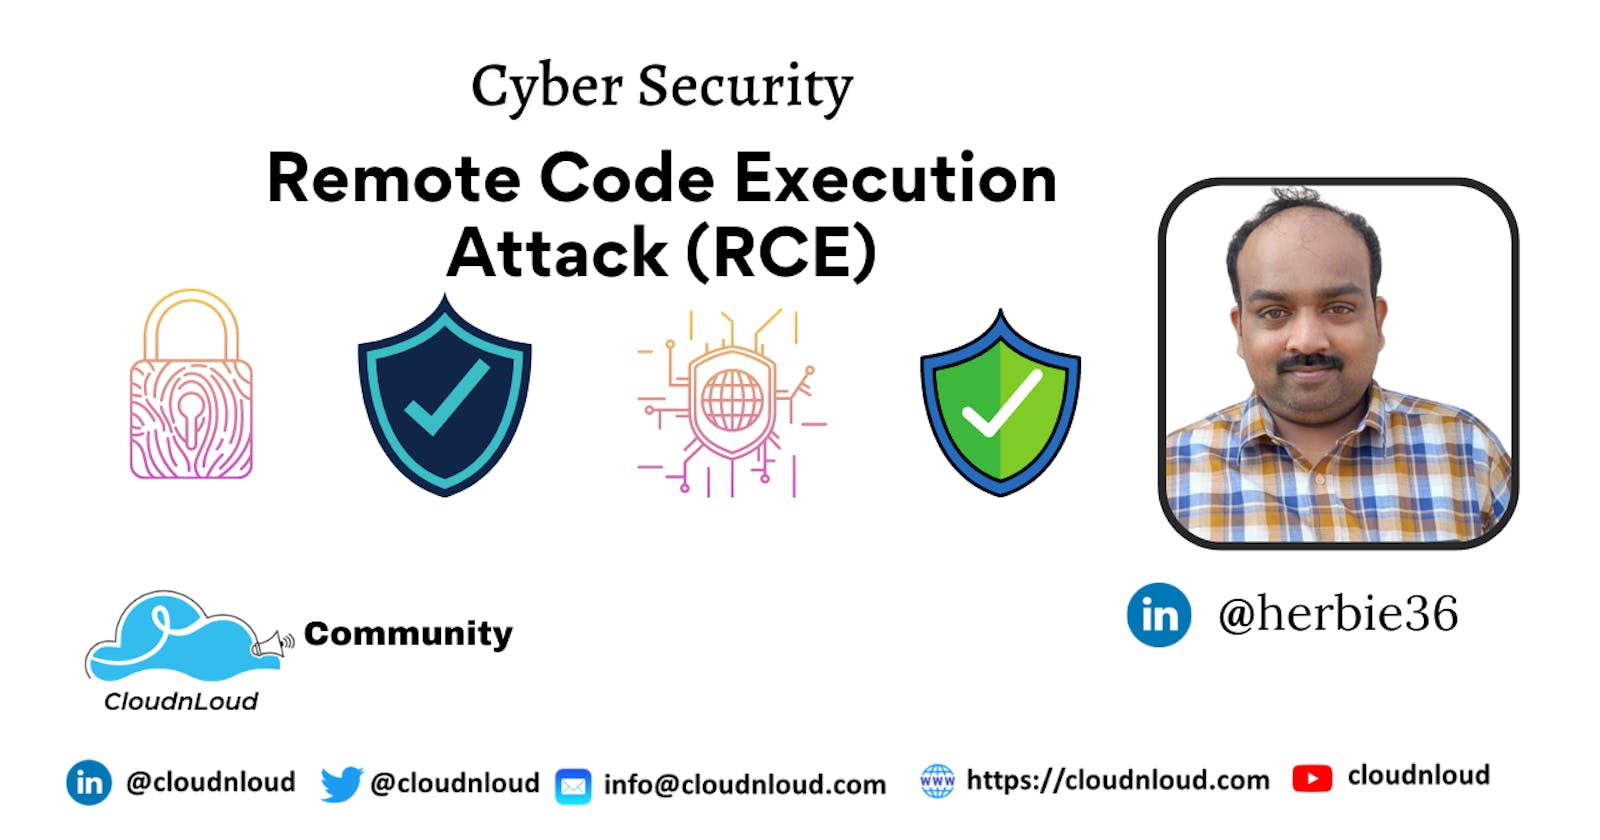 Remote Code Execution Attack (RCE)